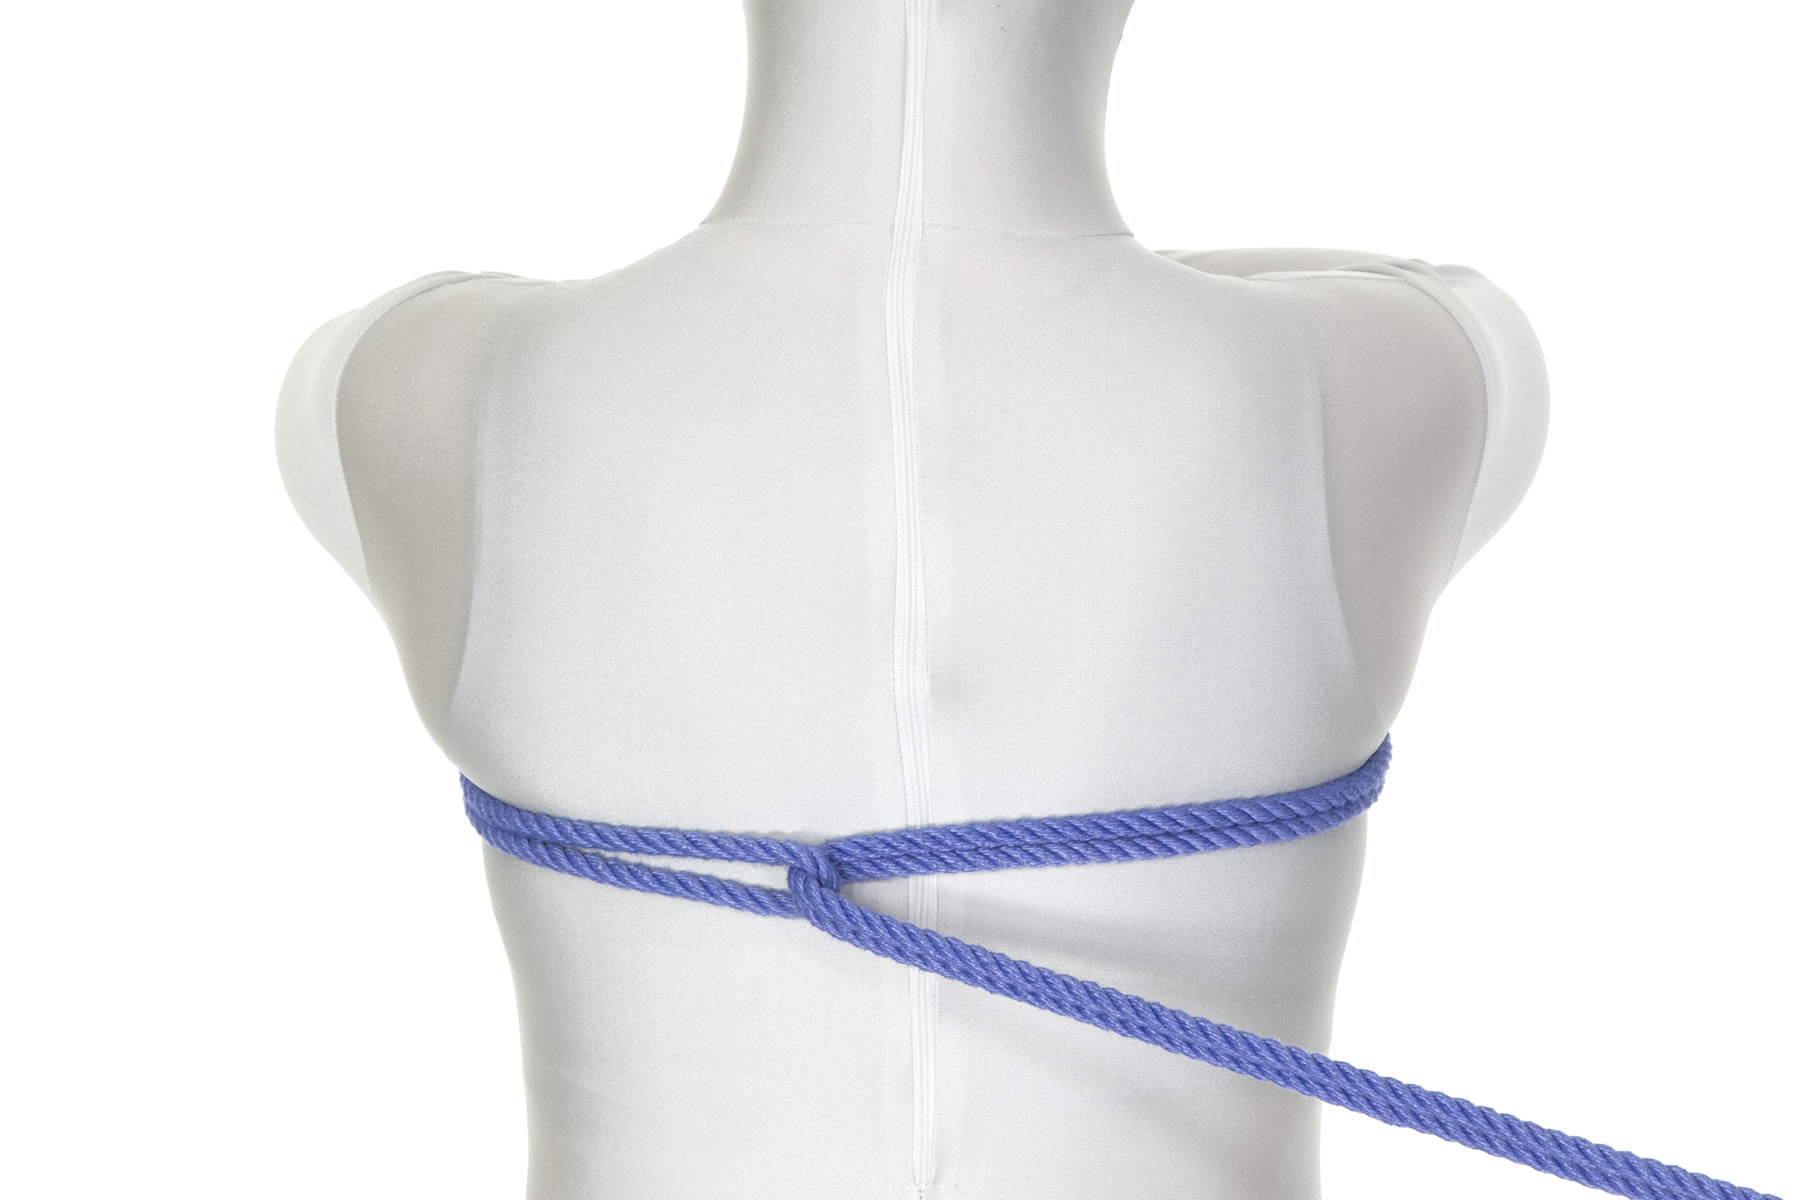 We are looking at the back of a person in a white bodysuit. The bight of a doubled blue rope has been wrapped all the way around the upper chest, going under the right armpit, across the front of the chest, and back under the left armpit. The bight ends up two inches to the left of the spine. The end of the rope makes a reverse tension through the bight and is pulled taut to the right of the frame.